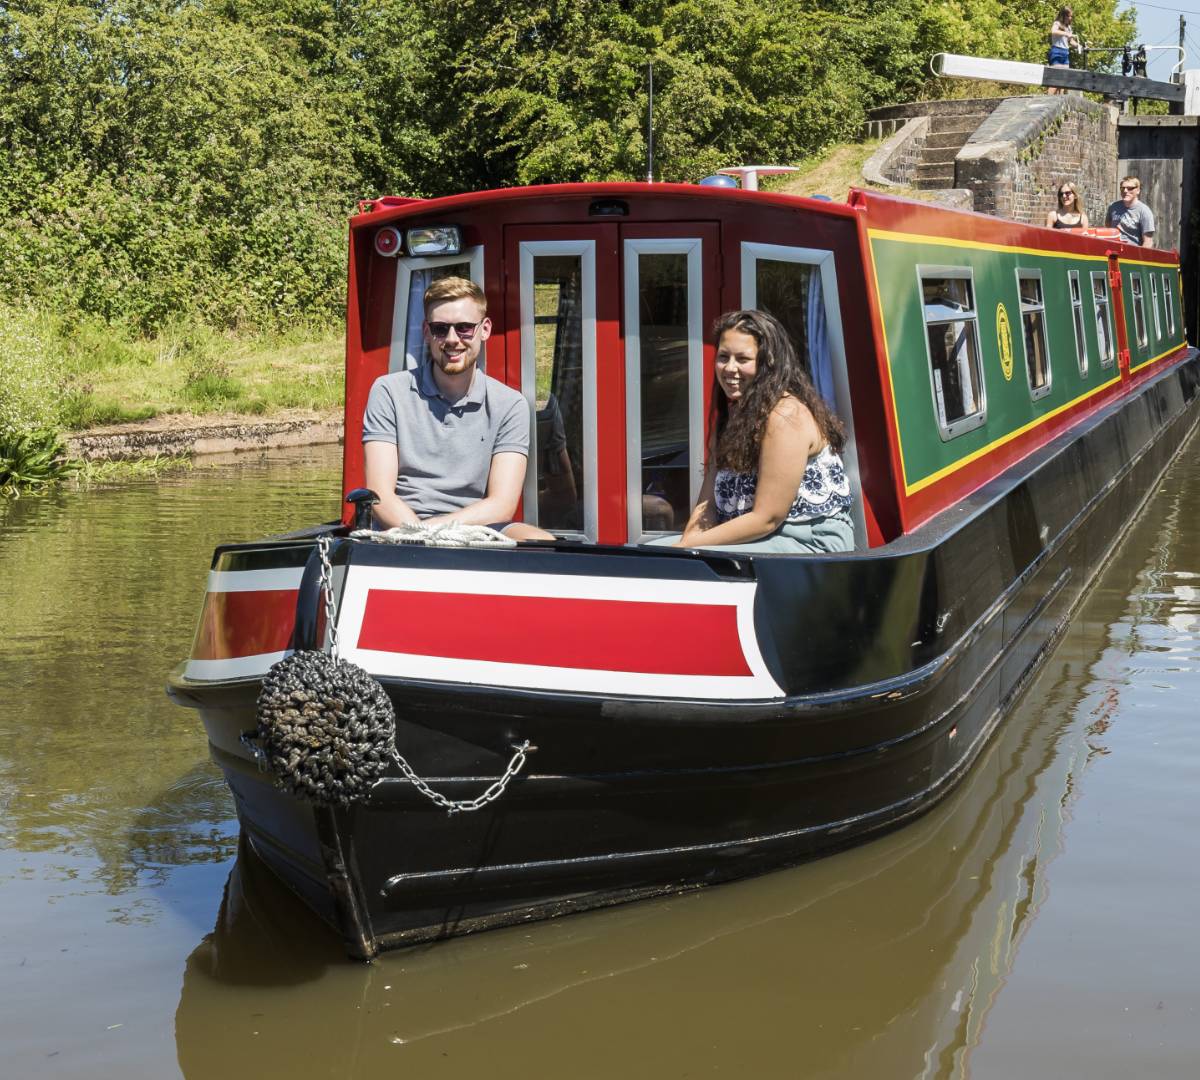 The Tern class canal boat